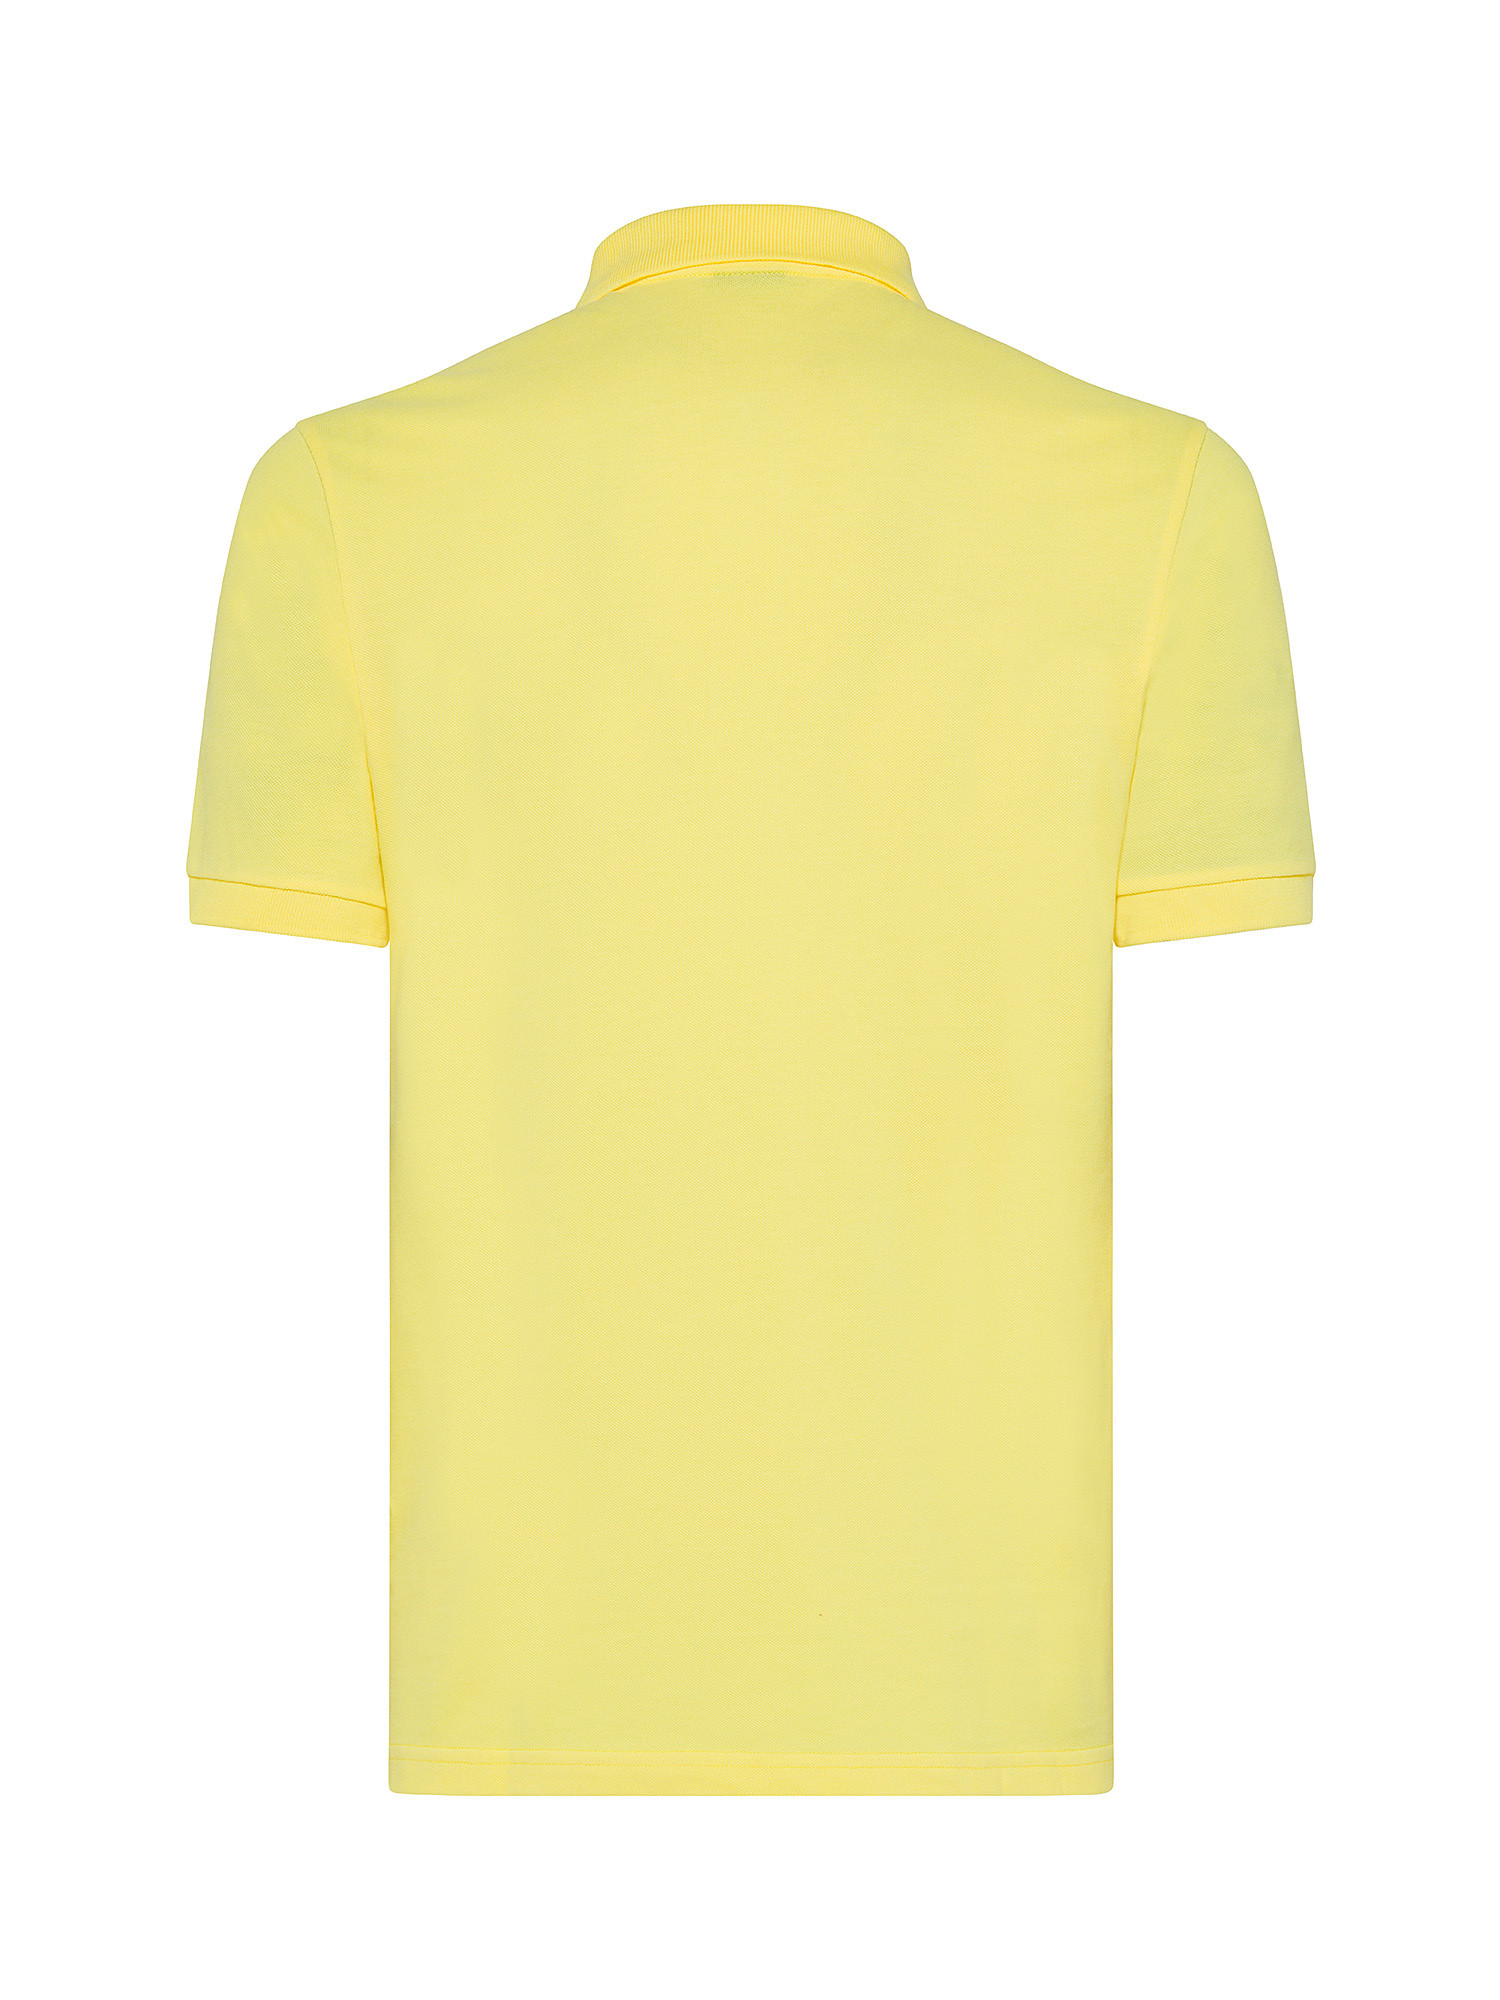 Colmar - Short-sleeved polo shirt in piqué cotton, Yellow, large image number 1